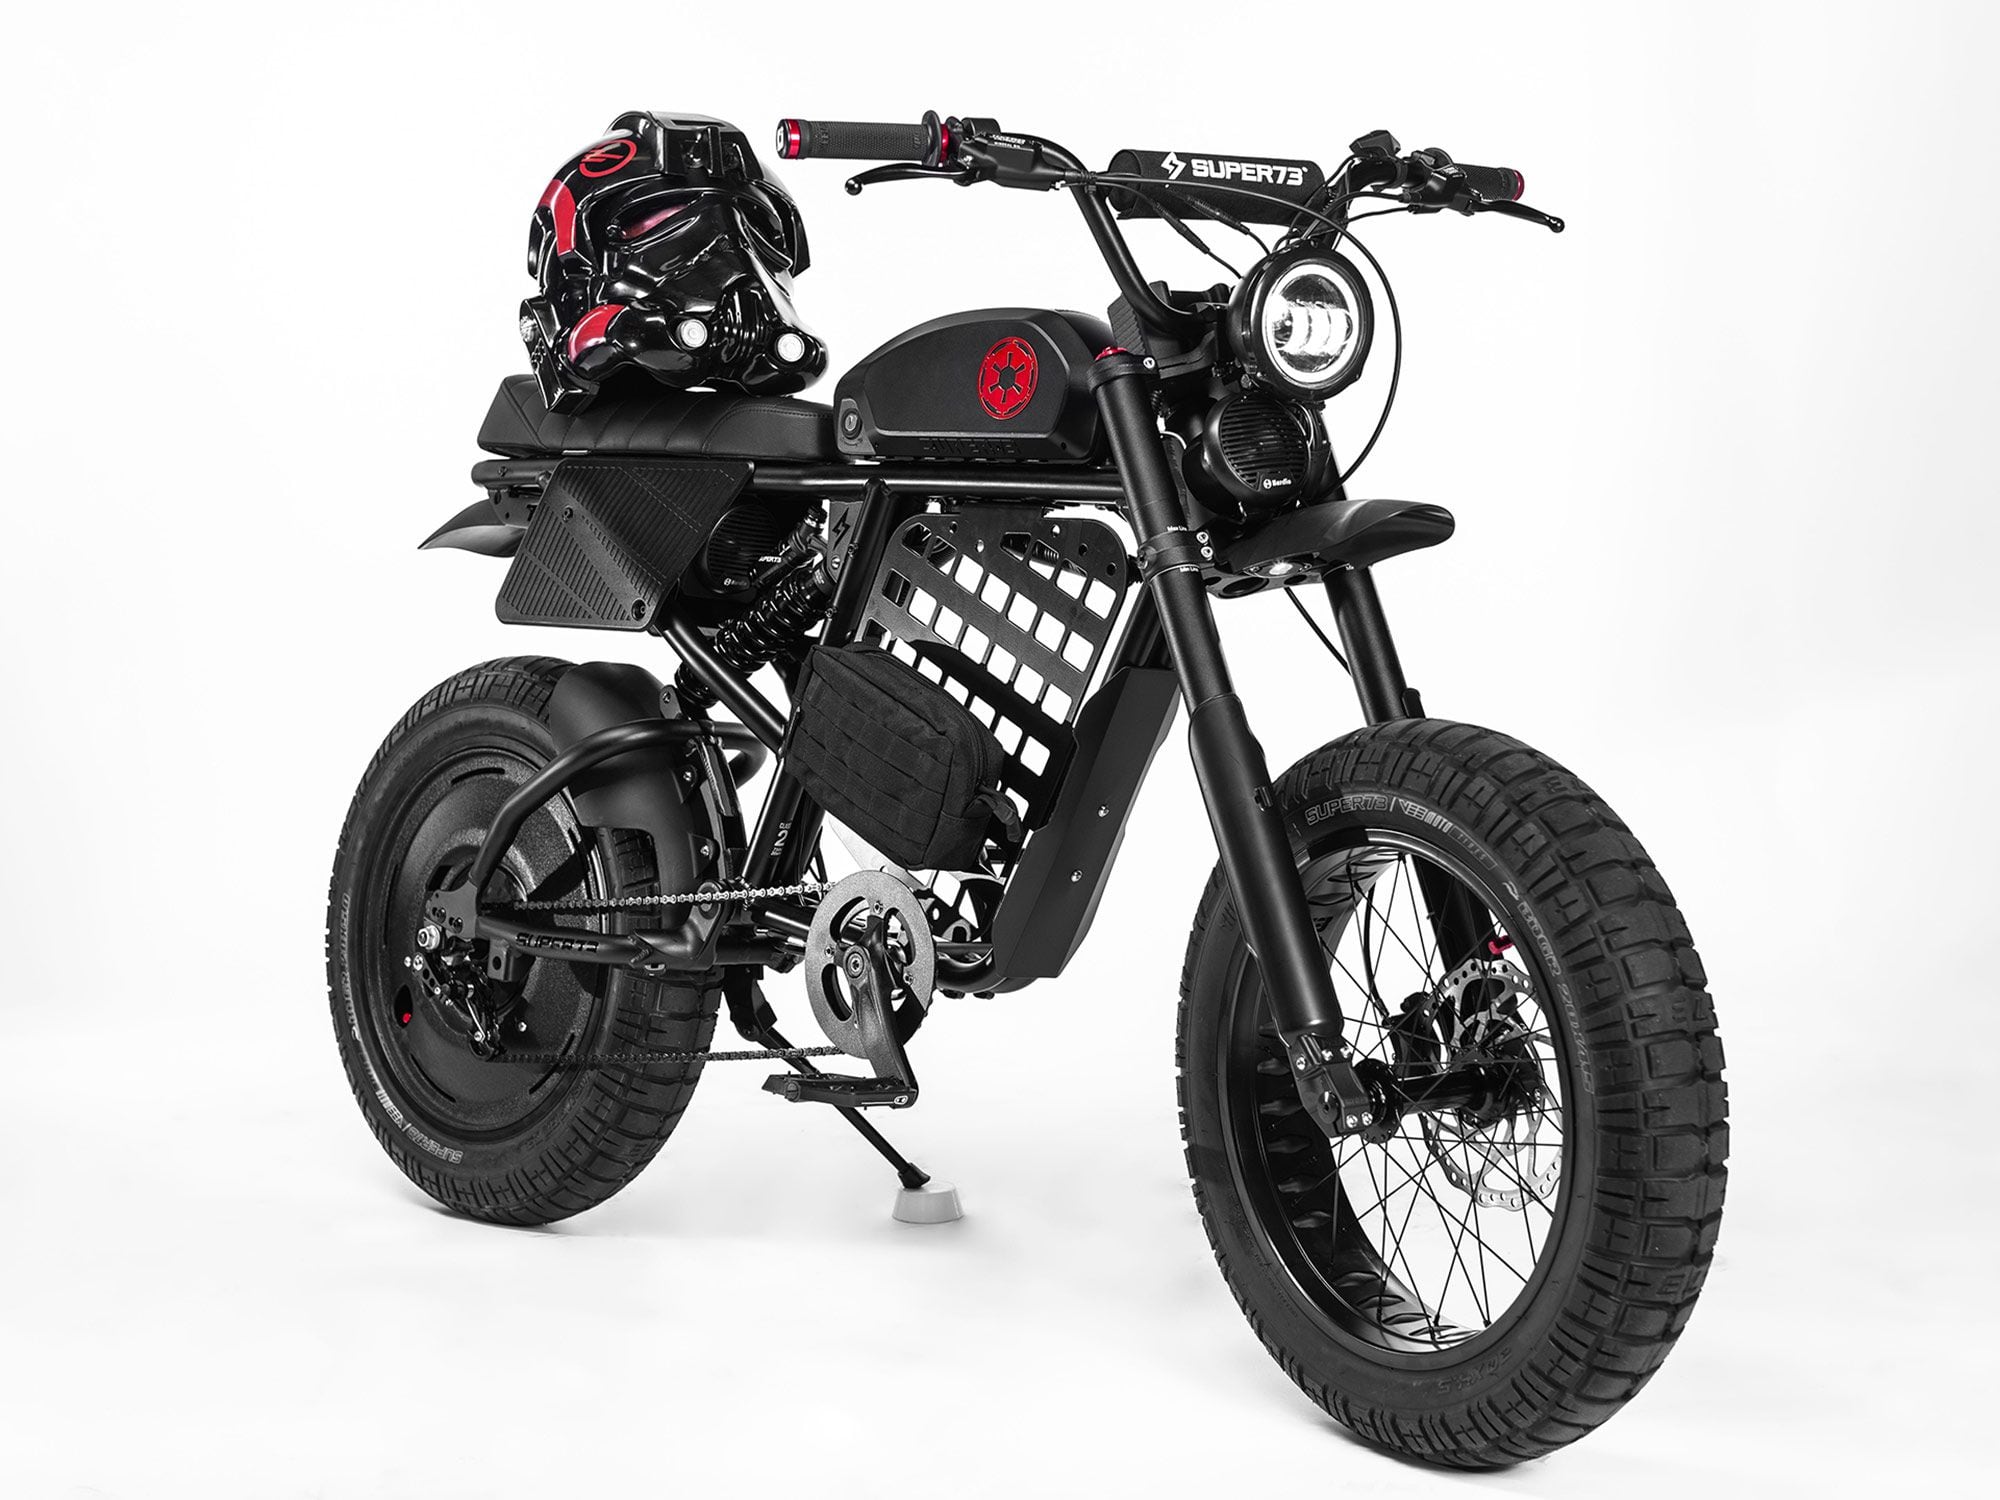 Super73-RX Electric Custom Goes to the Dark Side